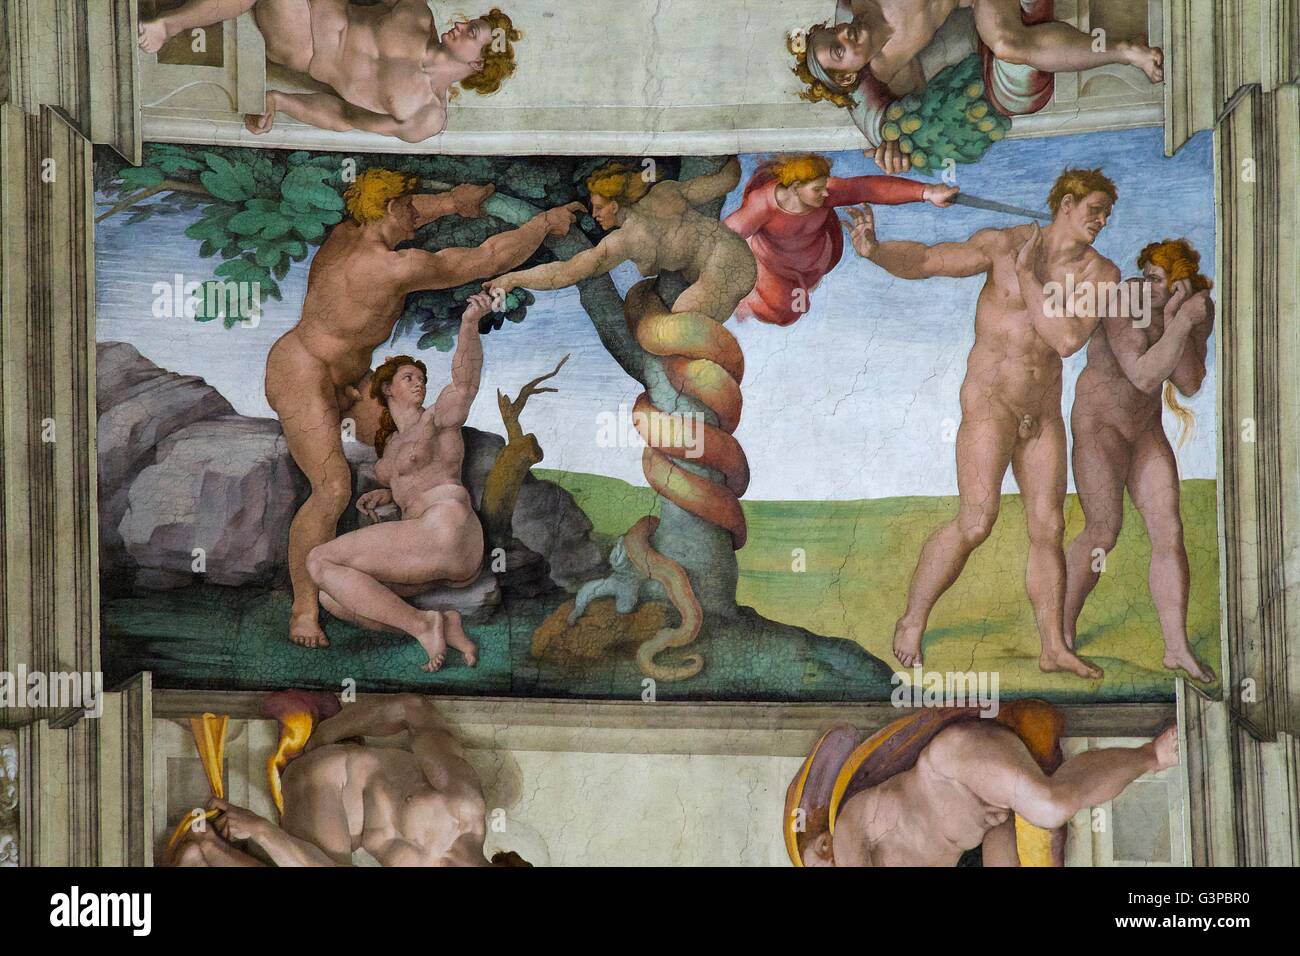 Fall and Expulsion from Garden of Eden, 1509-10, fresco, ceiling of Sistine Chapel, by Buonarroti Michelangelo, Vatican Museums, Stock Photo